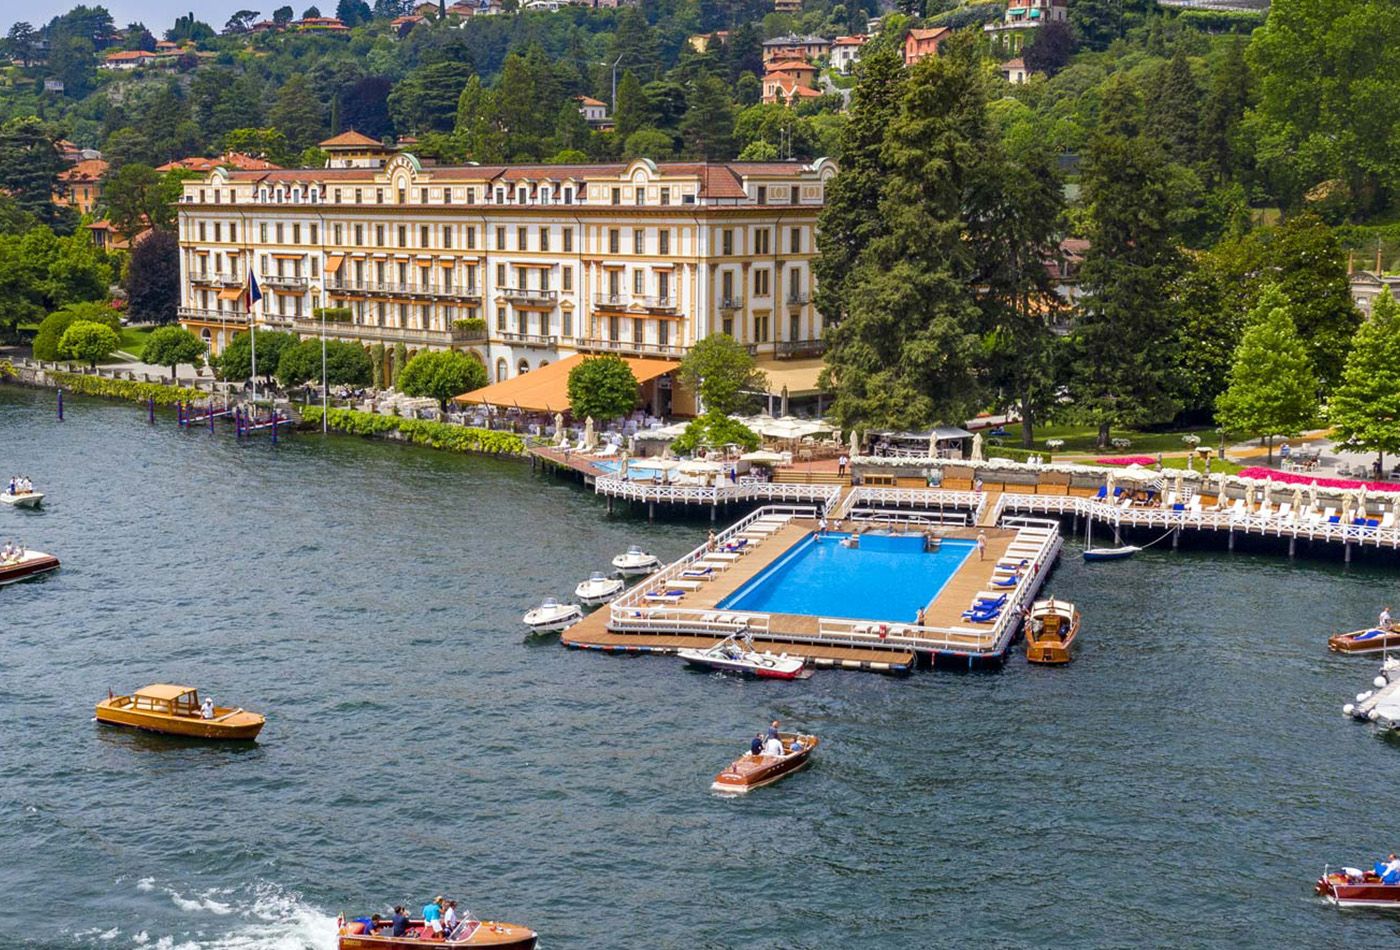 Hotel overlooking lake Como and pool which sits on the lake